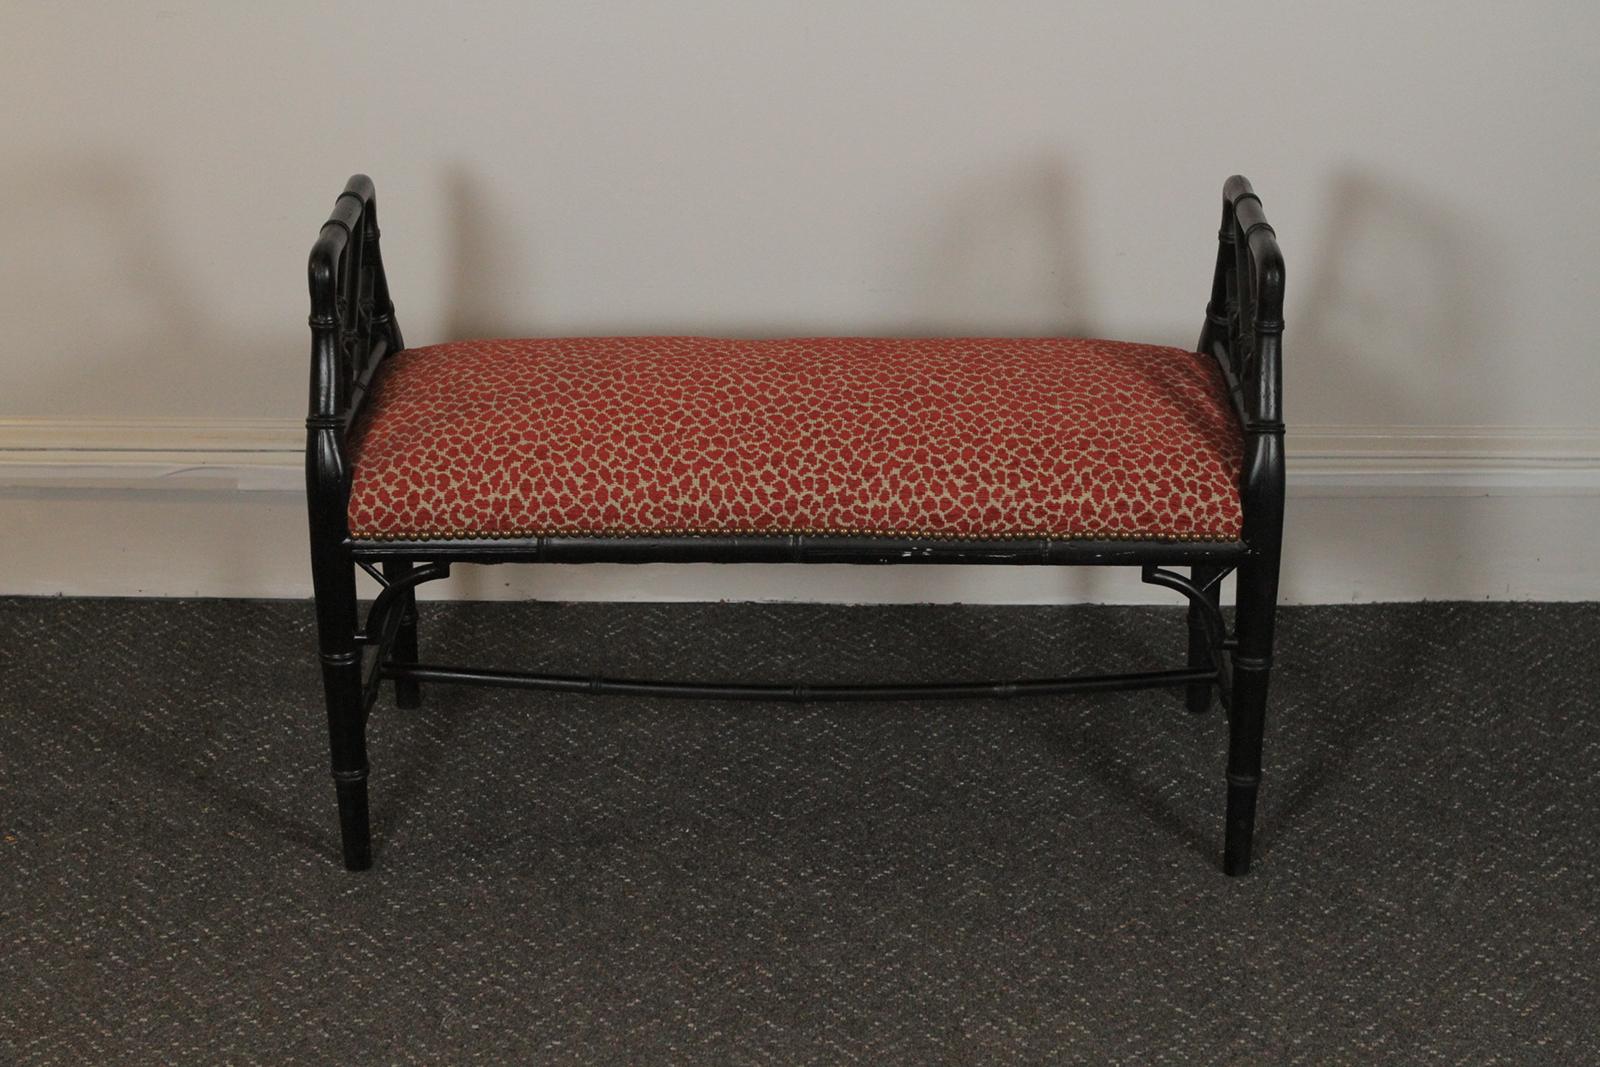 Faux bamboo wood upholstered bench.
Dimensions: 36” W x 15” D x 25” H x 18” seat.